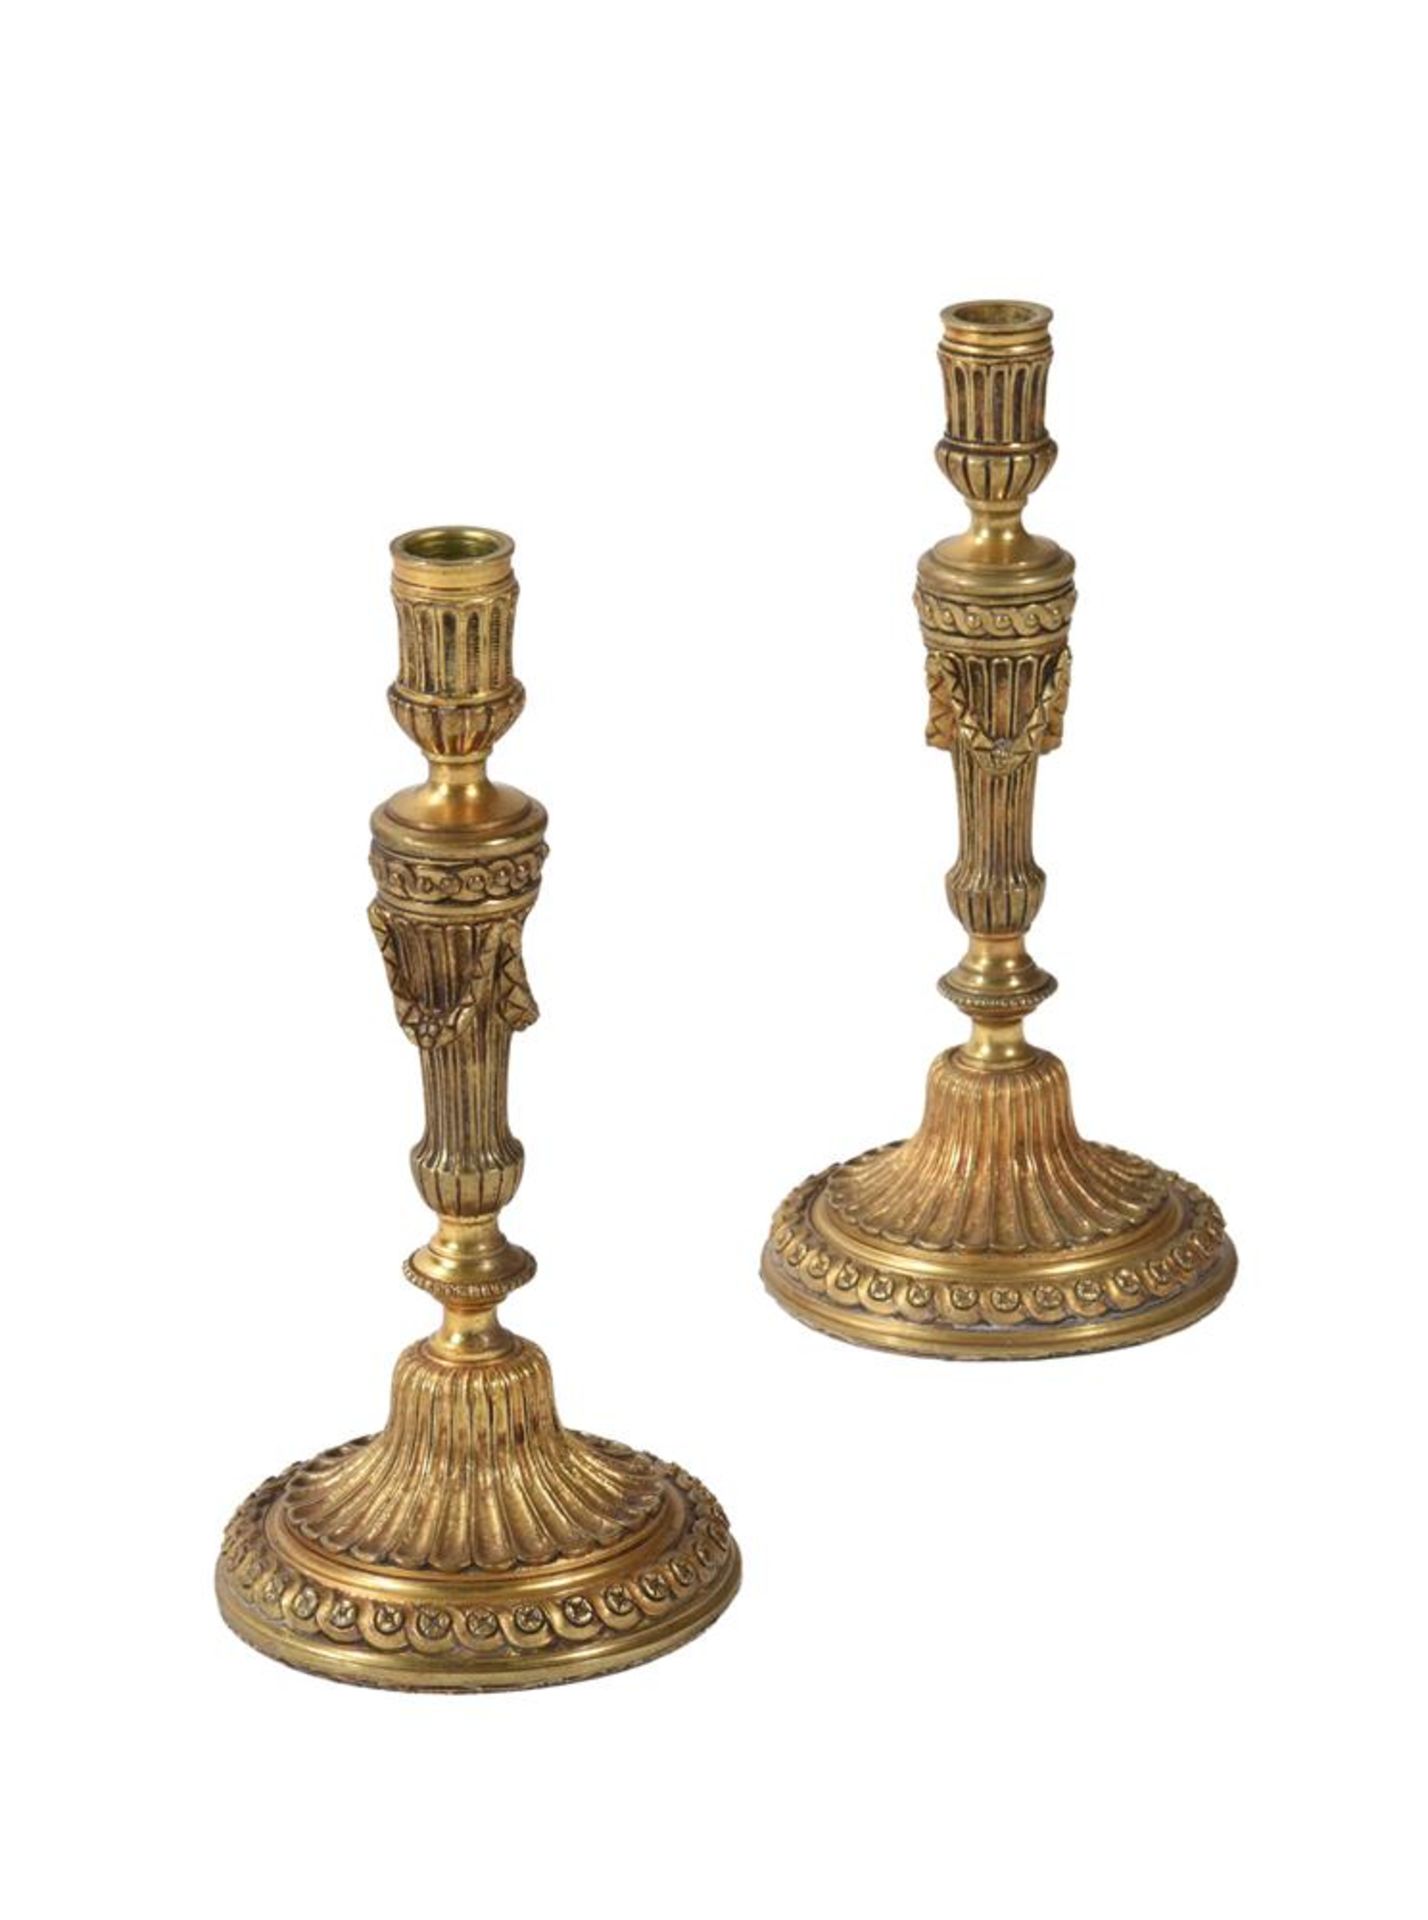 A PAIR OF GILT METAL CANDLESTICK LAMPS